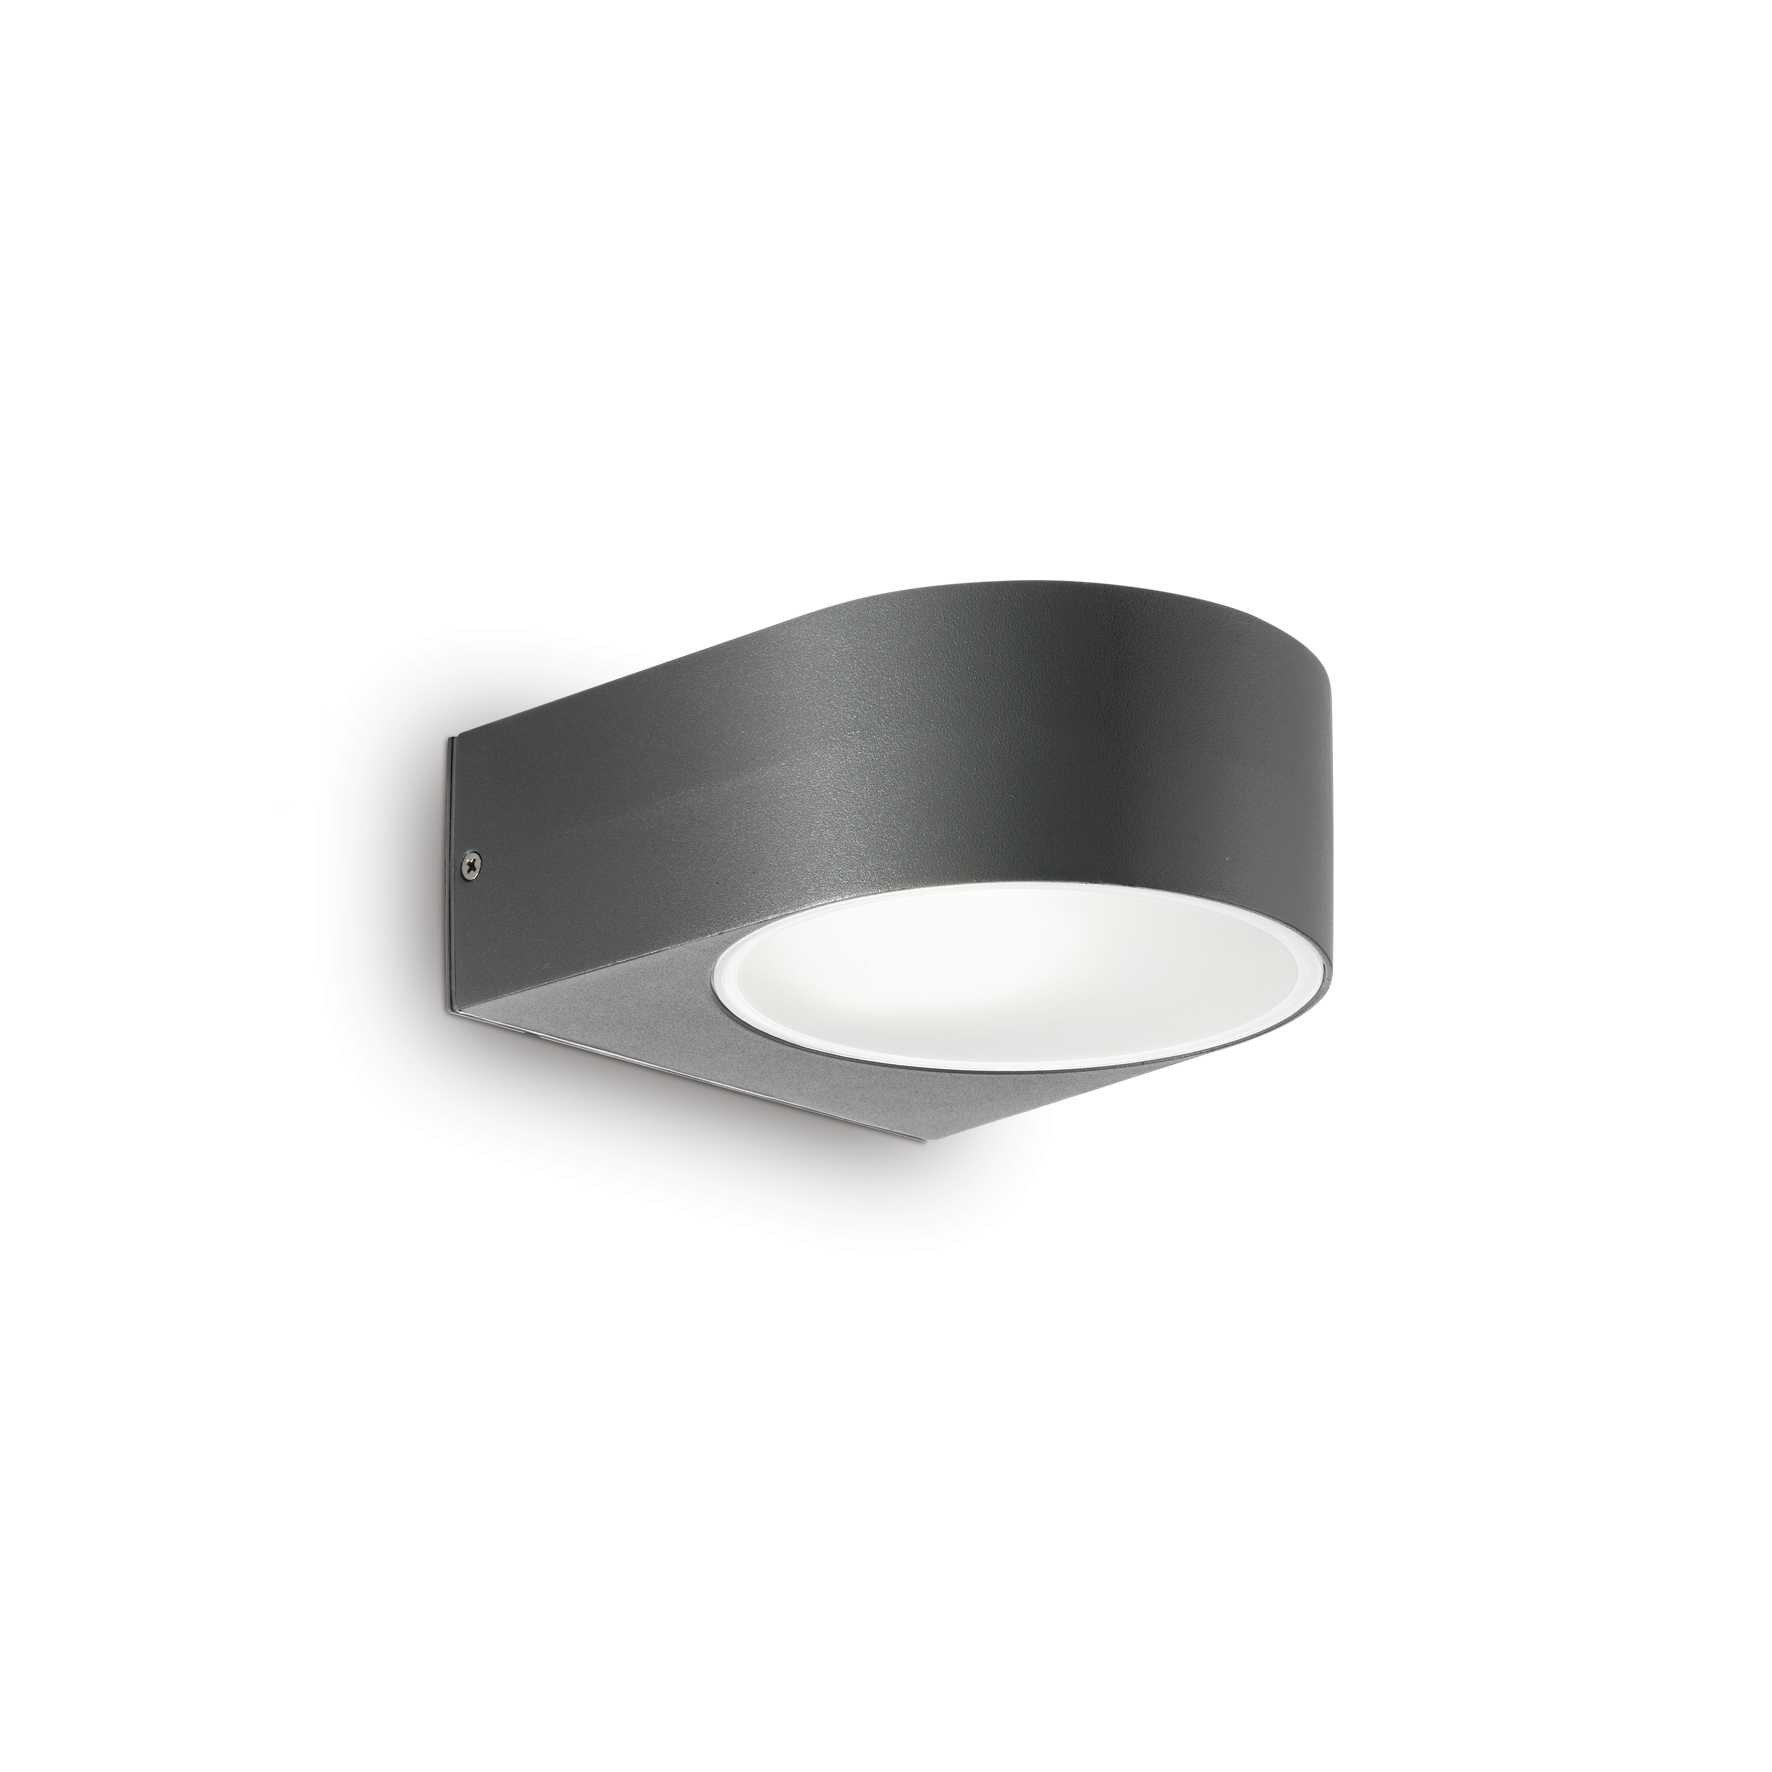 Iko 1 Light Outdoor Up Down Wall Light Anthracite IP55 E27